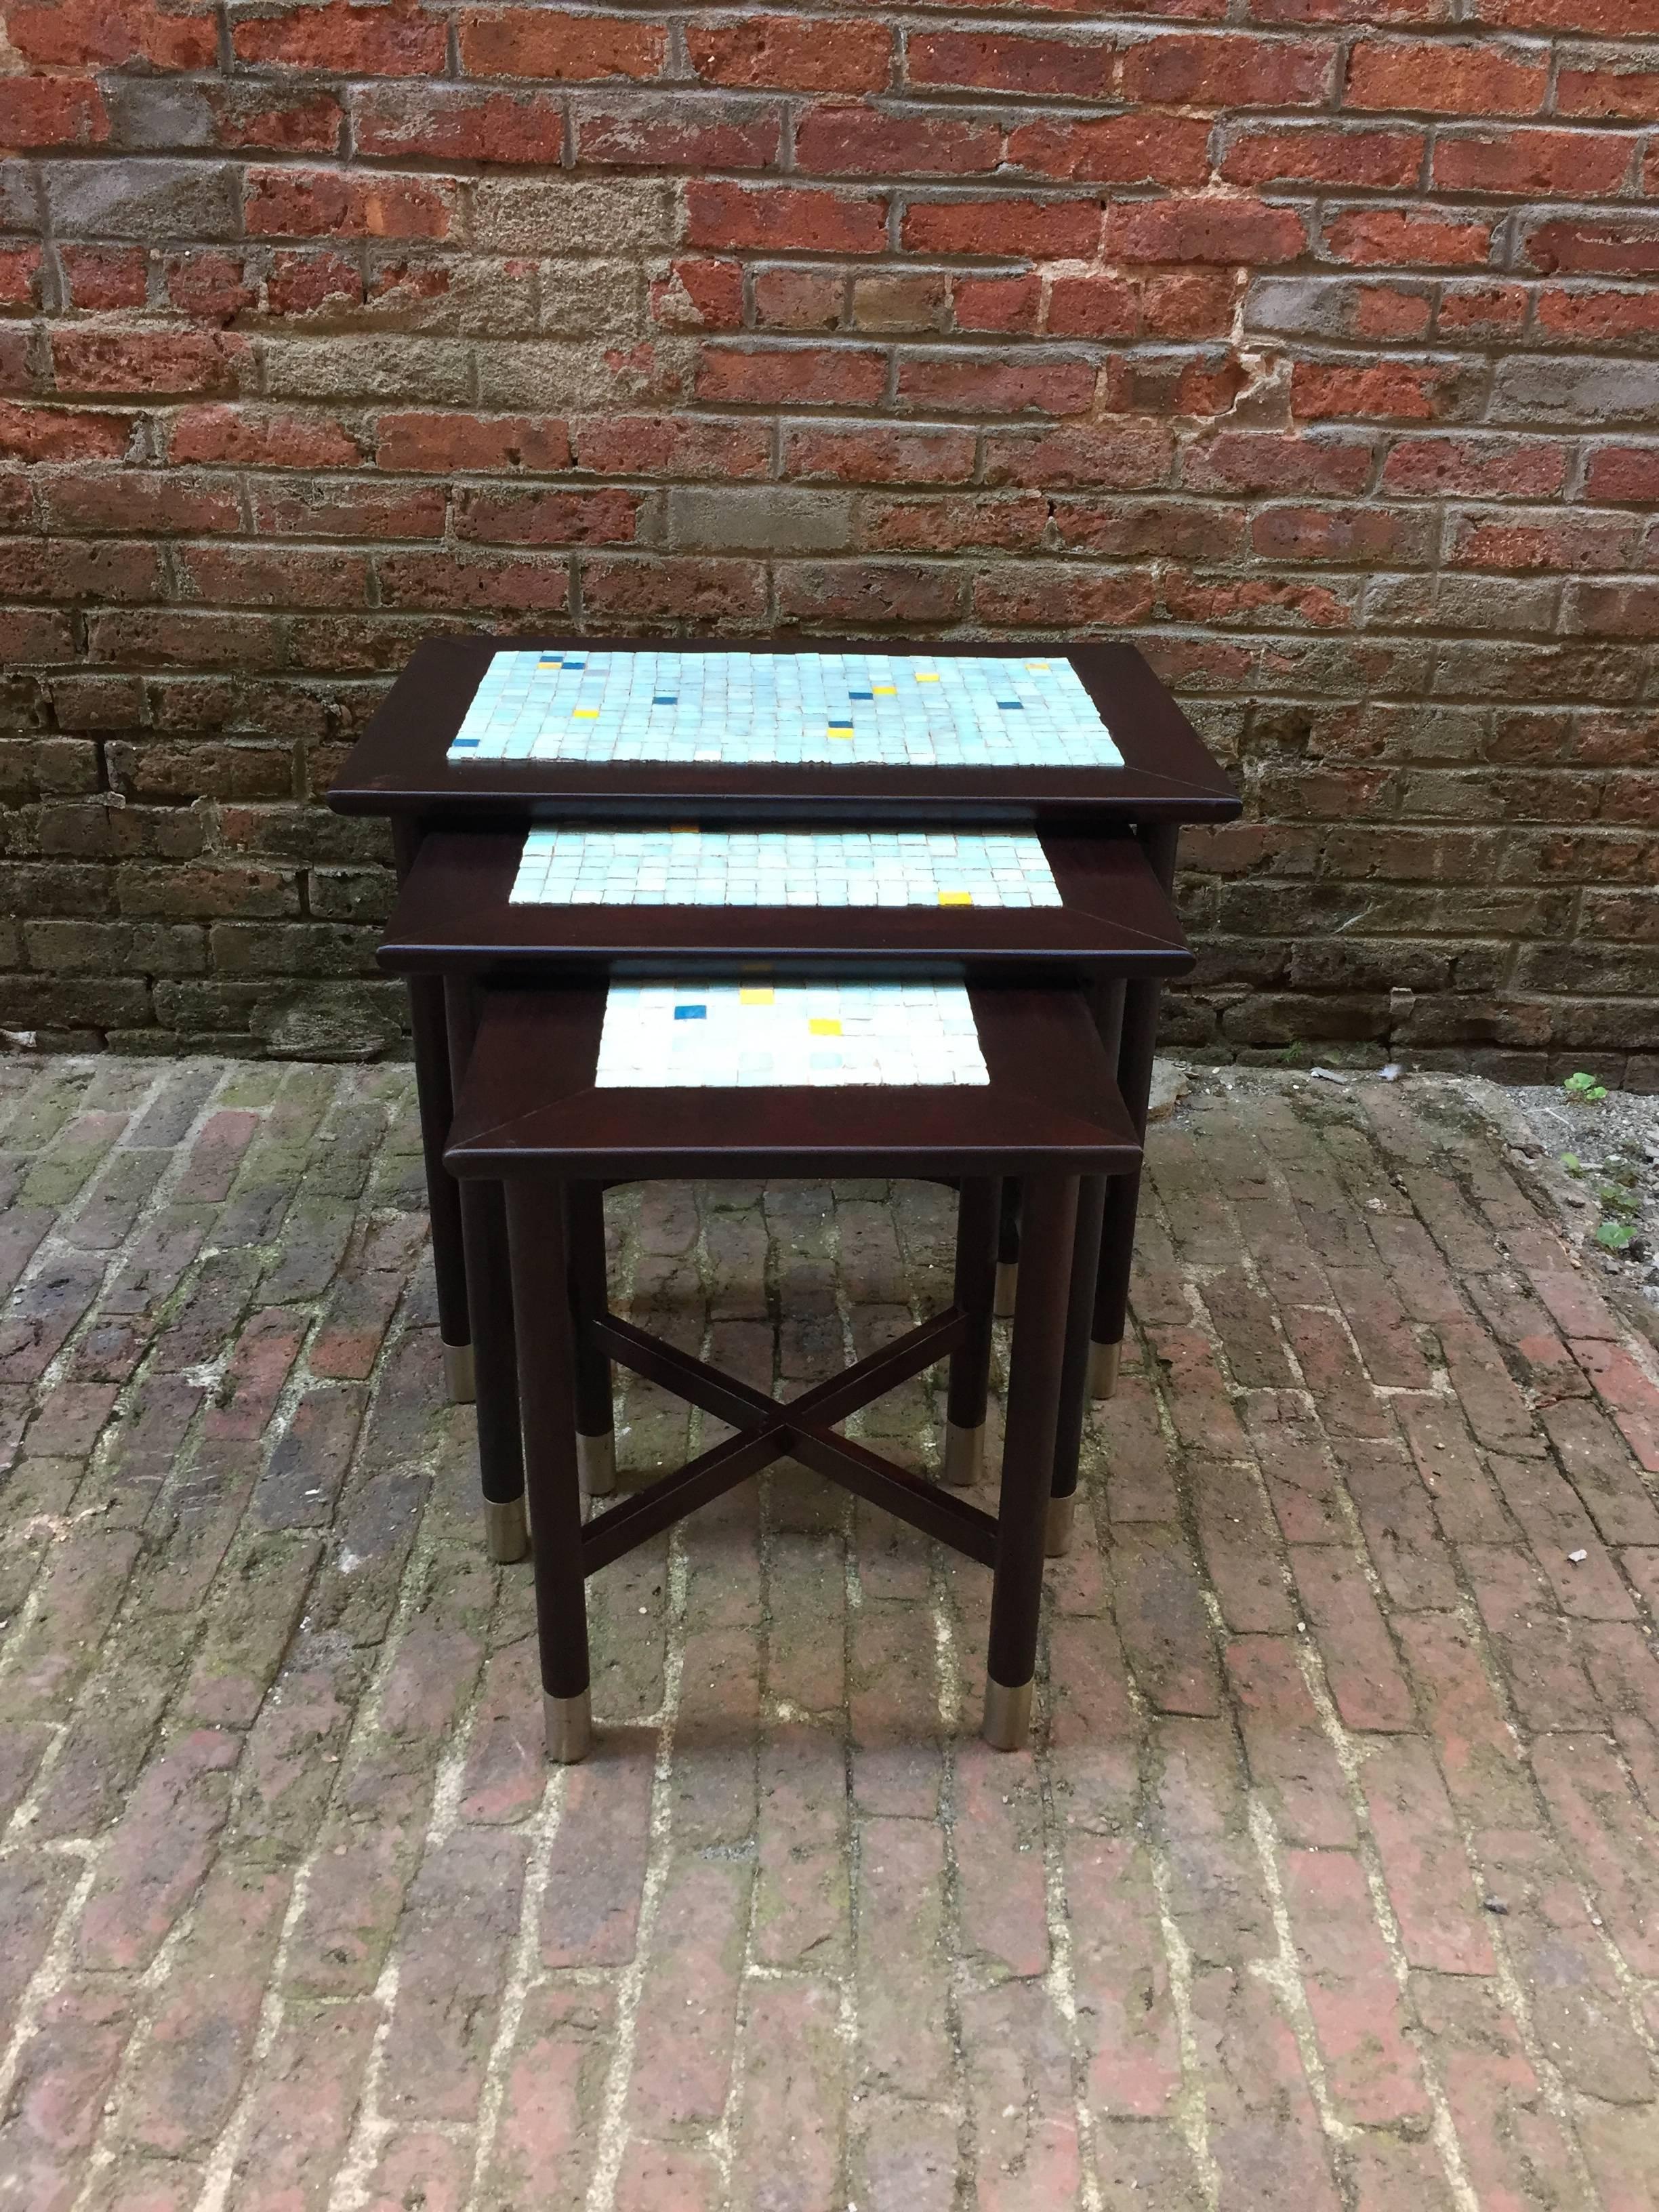 Beautiful set of three wood and glass tile nesting tables in the style of Ed Wormley for Dunbar. Each table has inlaid glass tiles. The colors range from a sky blue, yellow and dark blue. Each mosaic is unique. The round dowel legs end with brushed